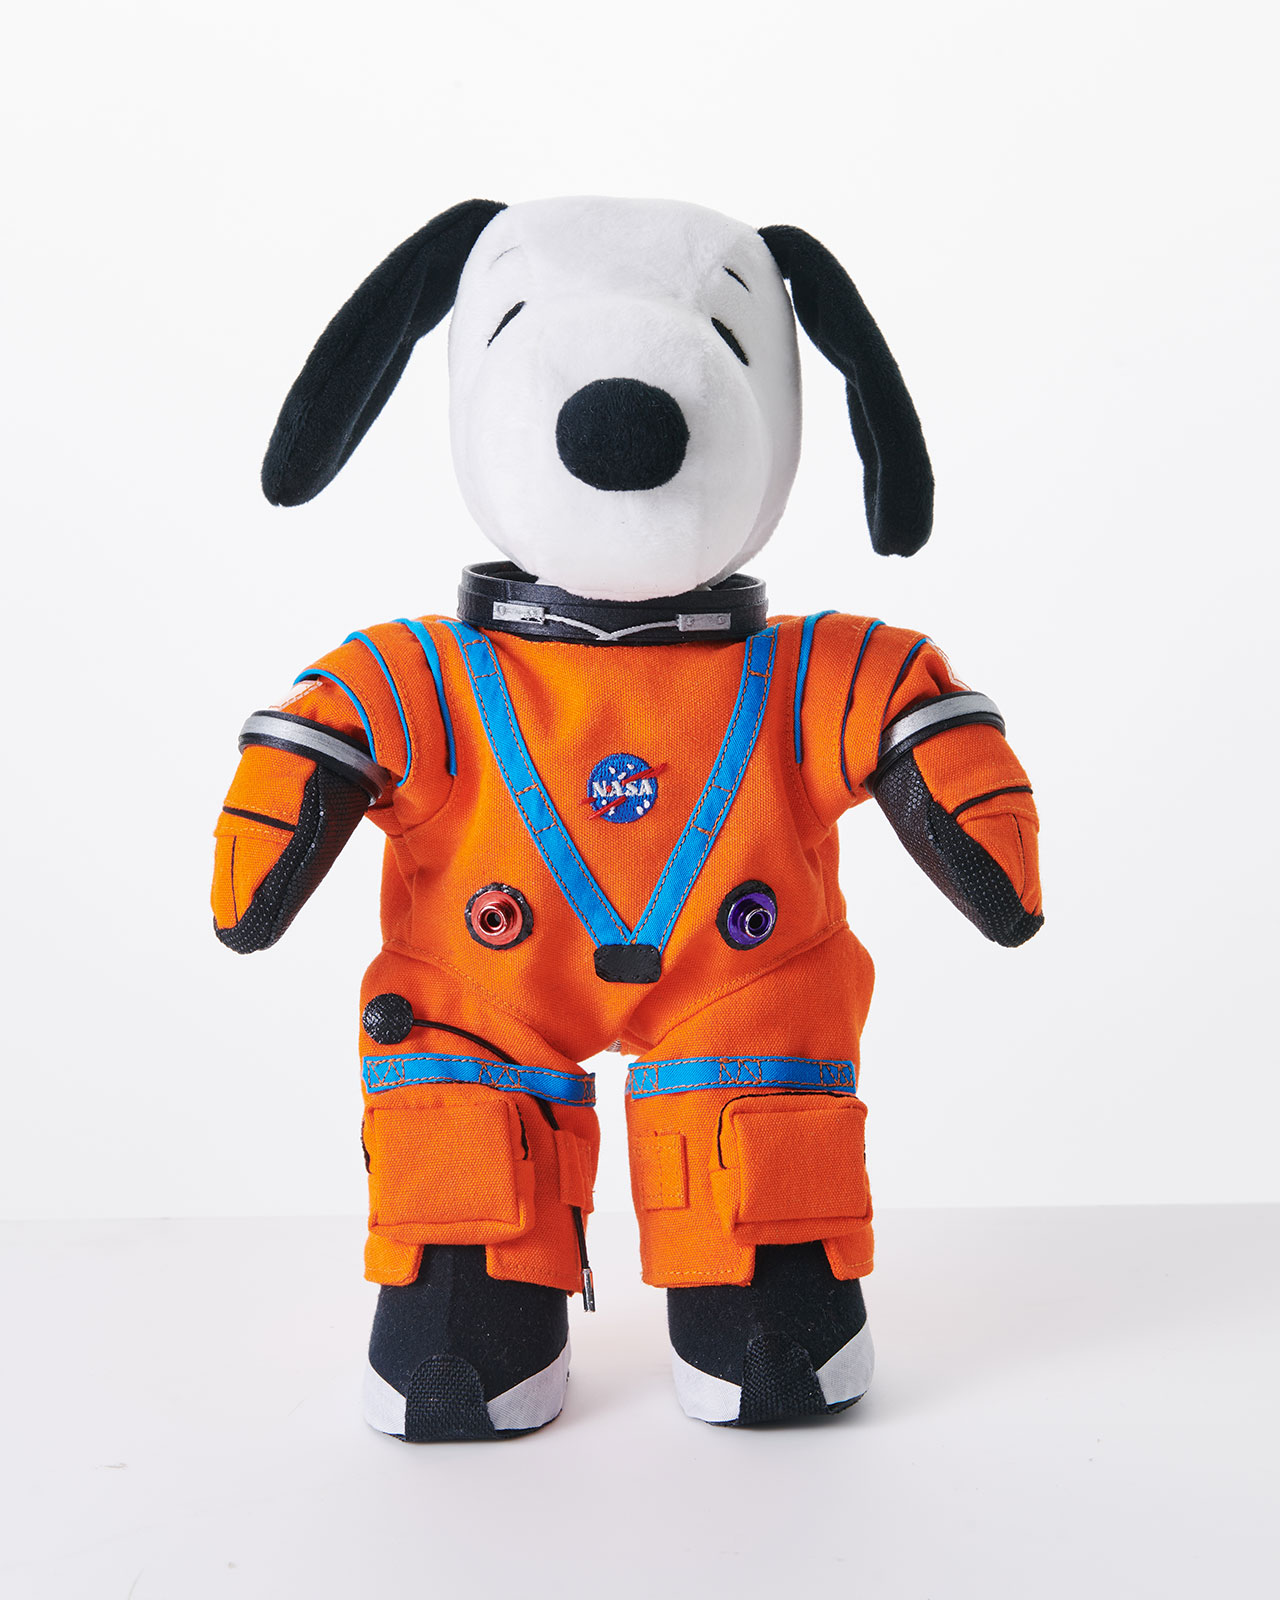 Snoopy's Artemis I garb is a custom-made, miniature of NASA's Orion Crew Survival System pressure suit.